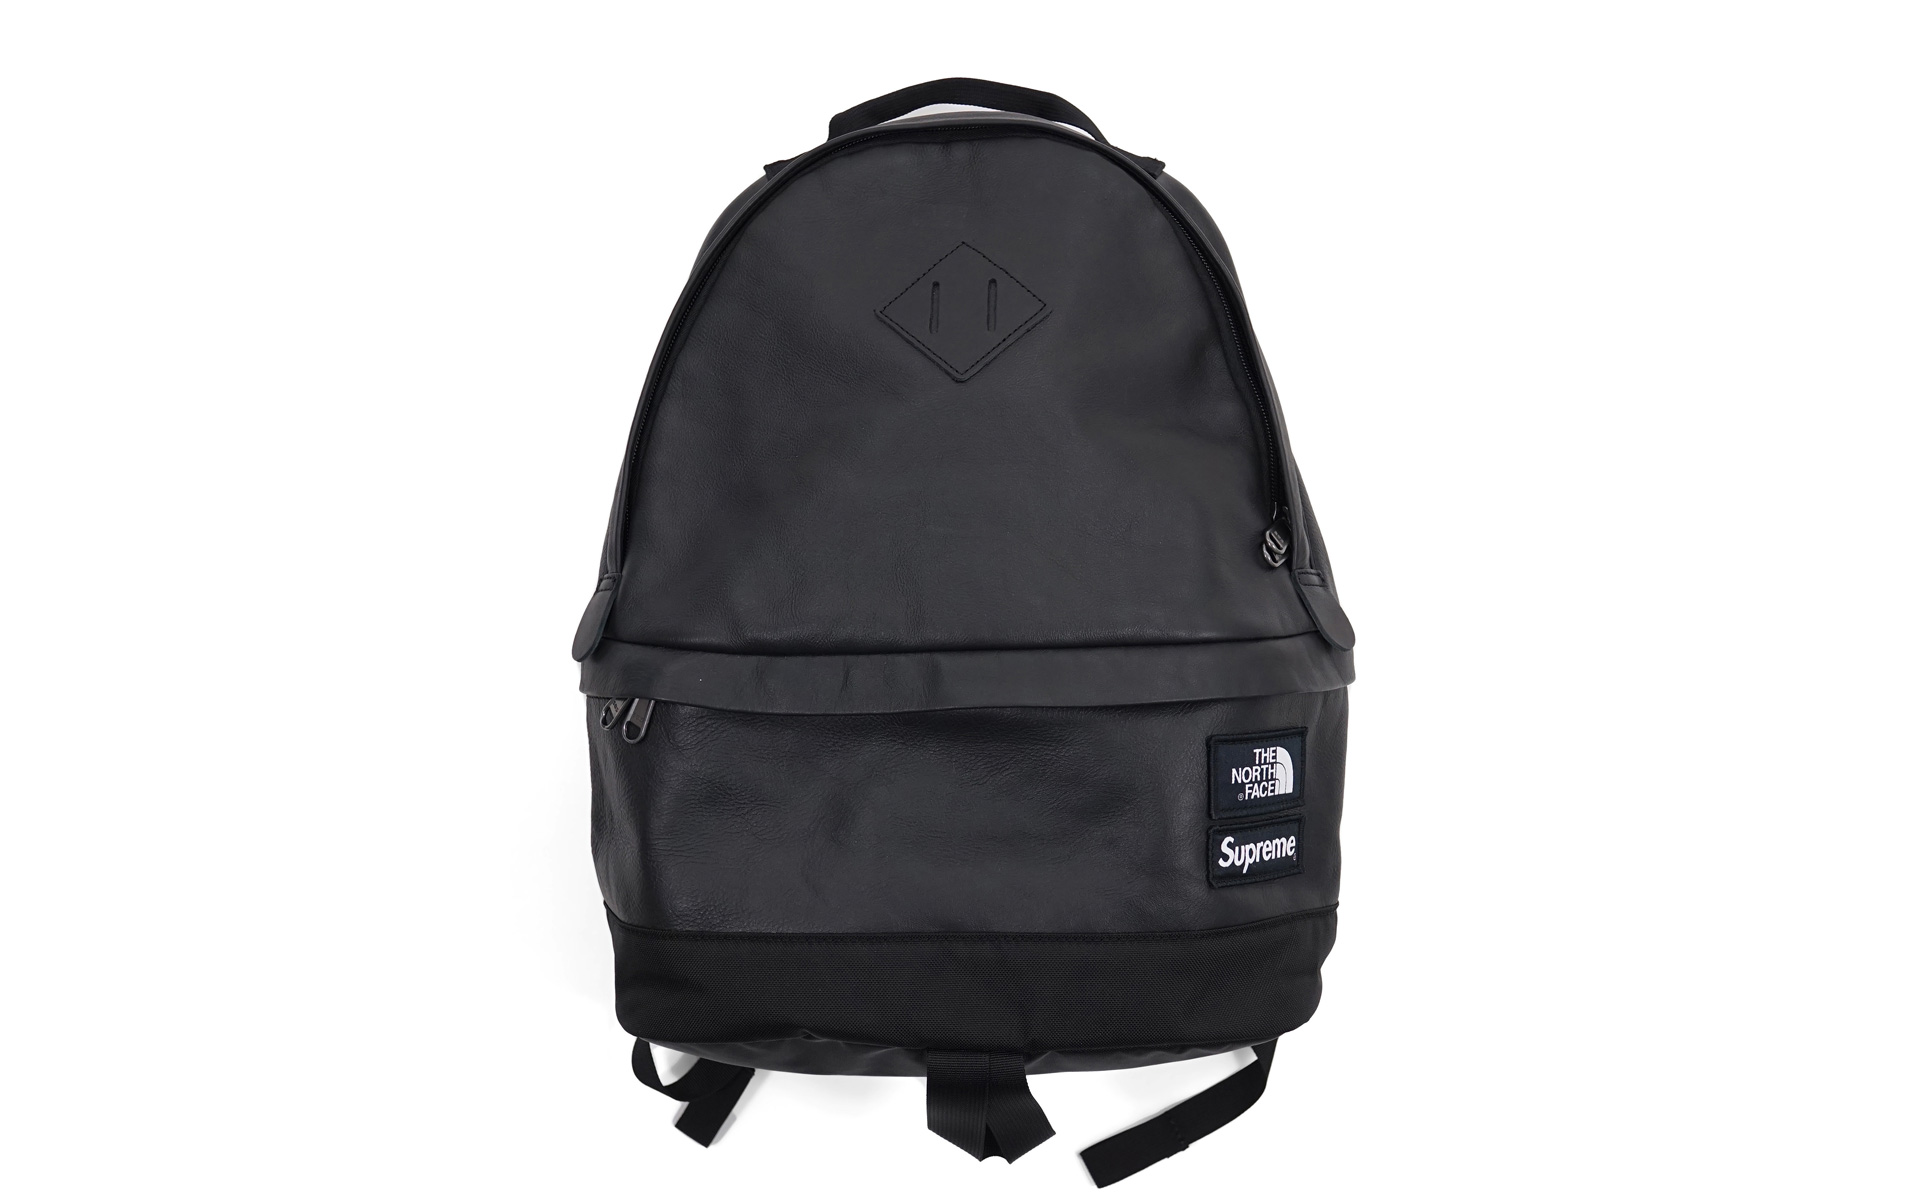 supreme the north face leather day pack